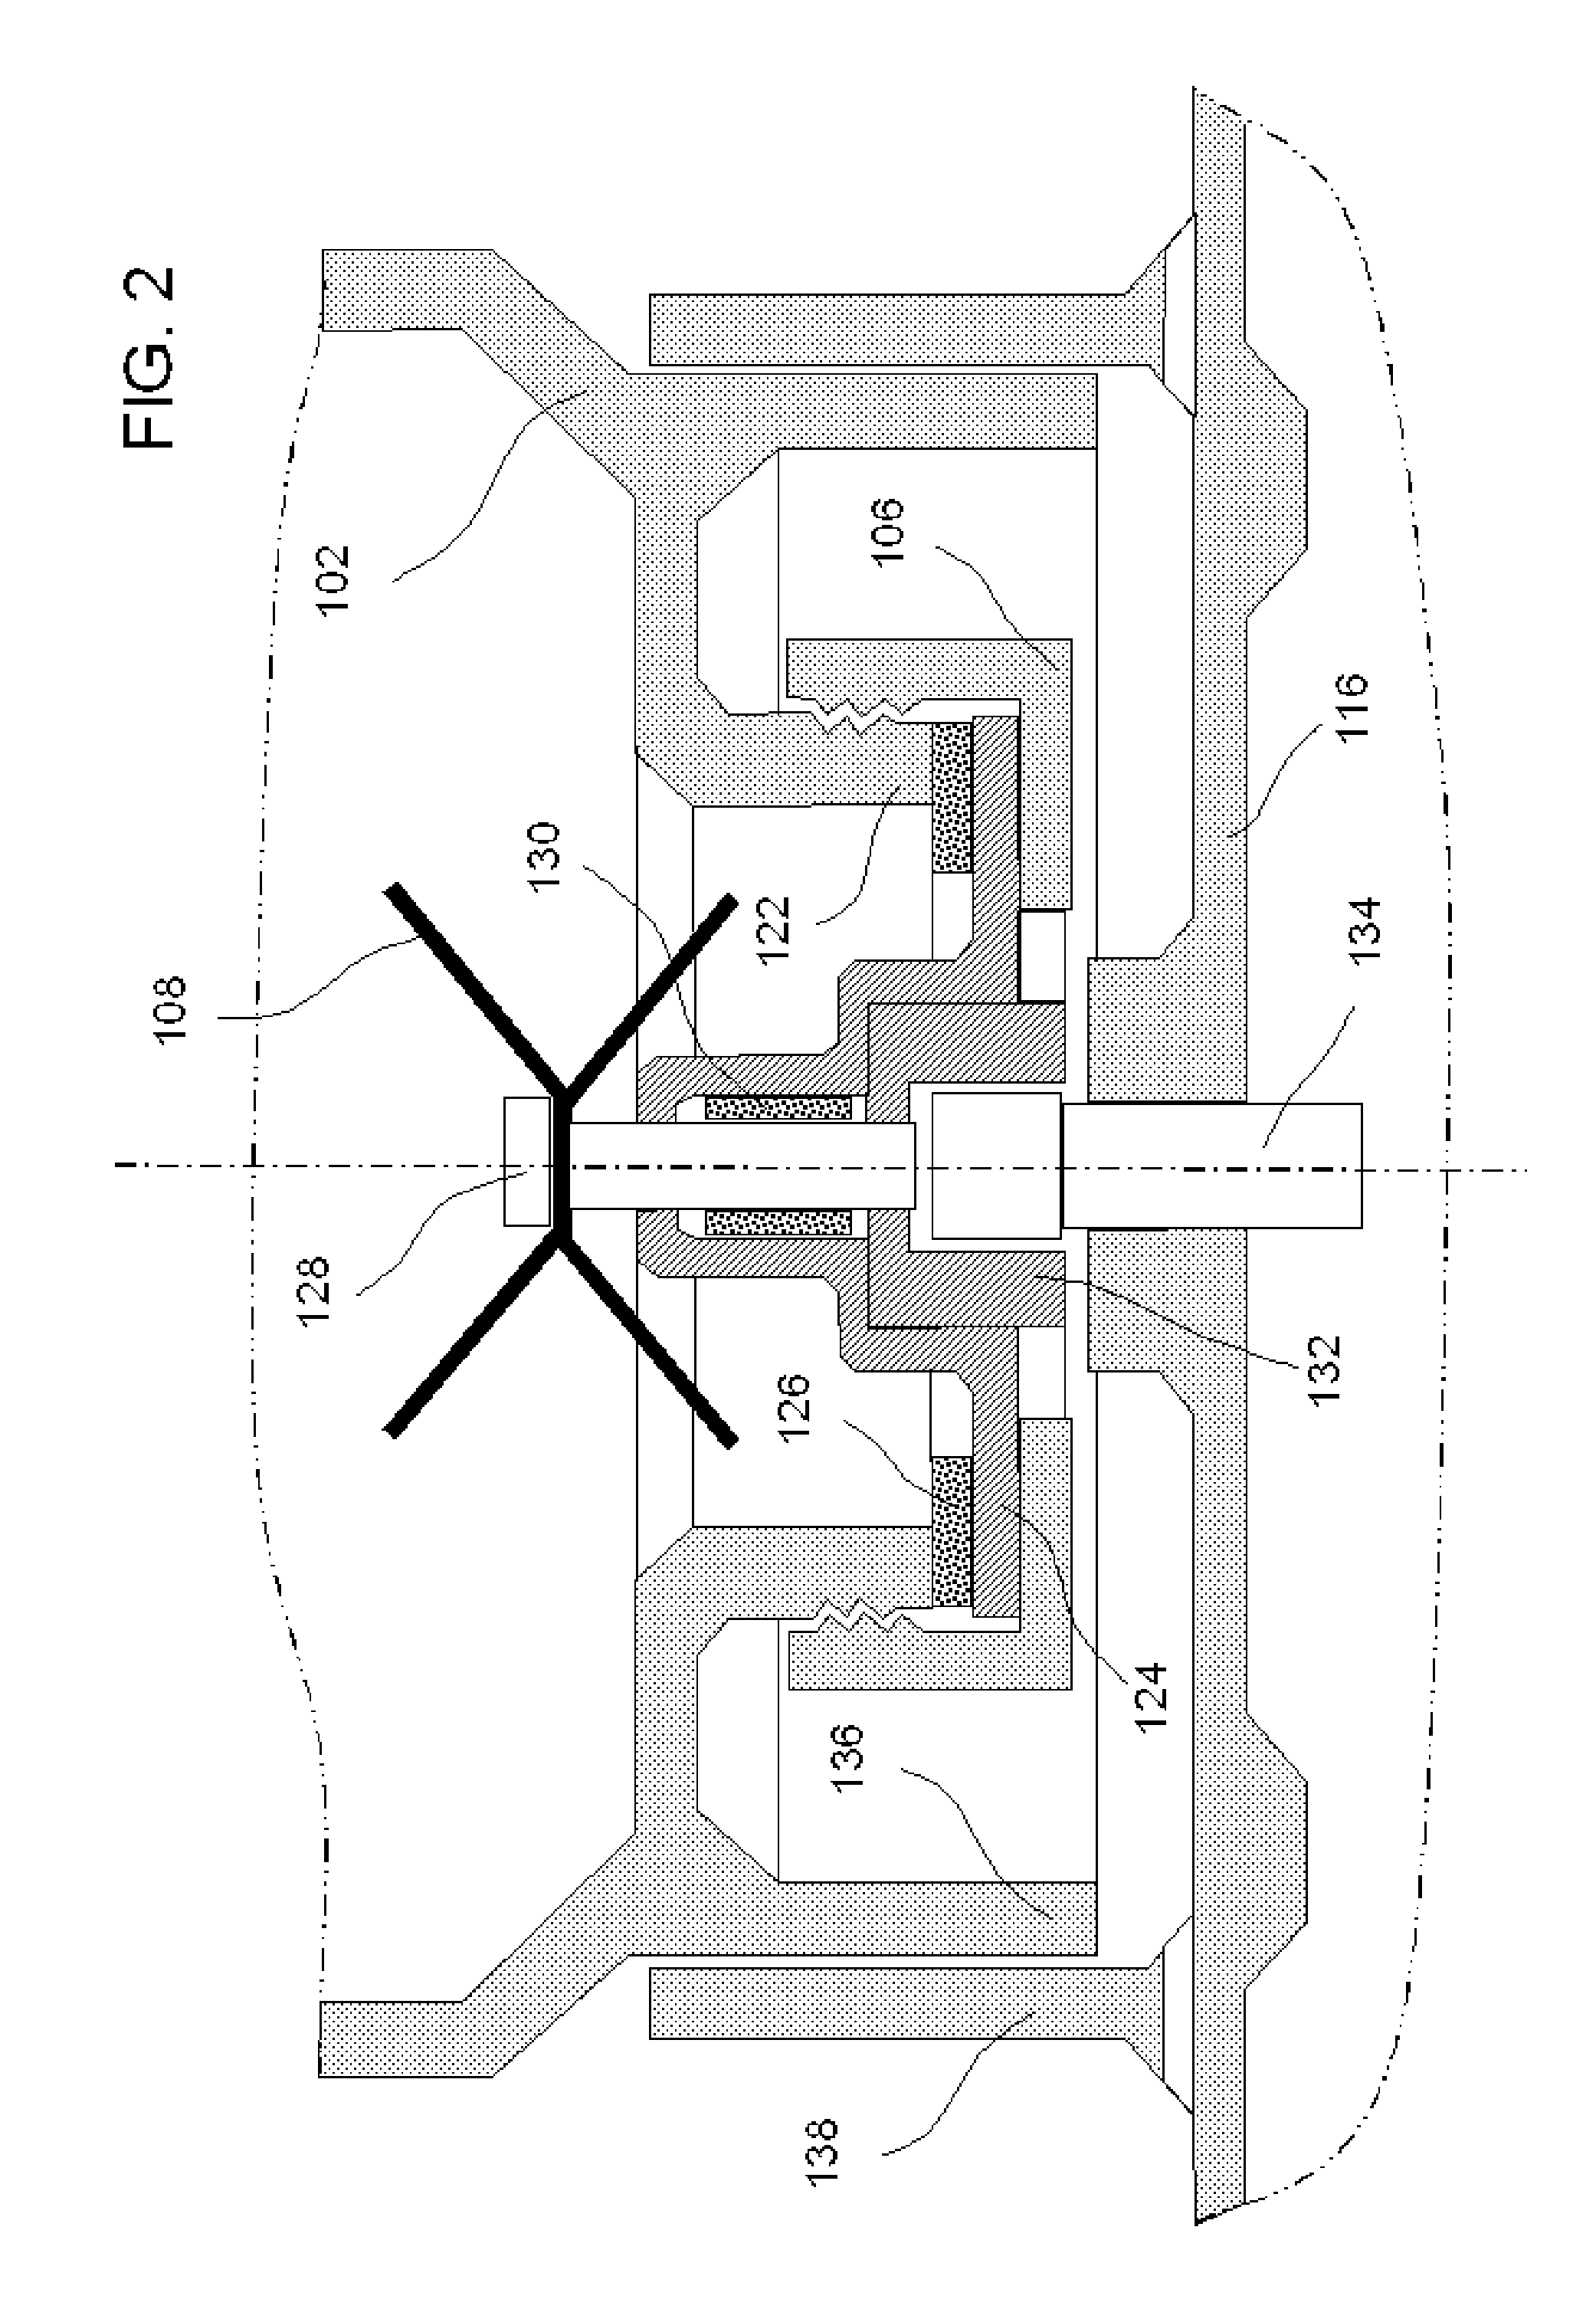 Automated Soup Making Apparatus